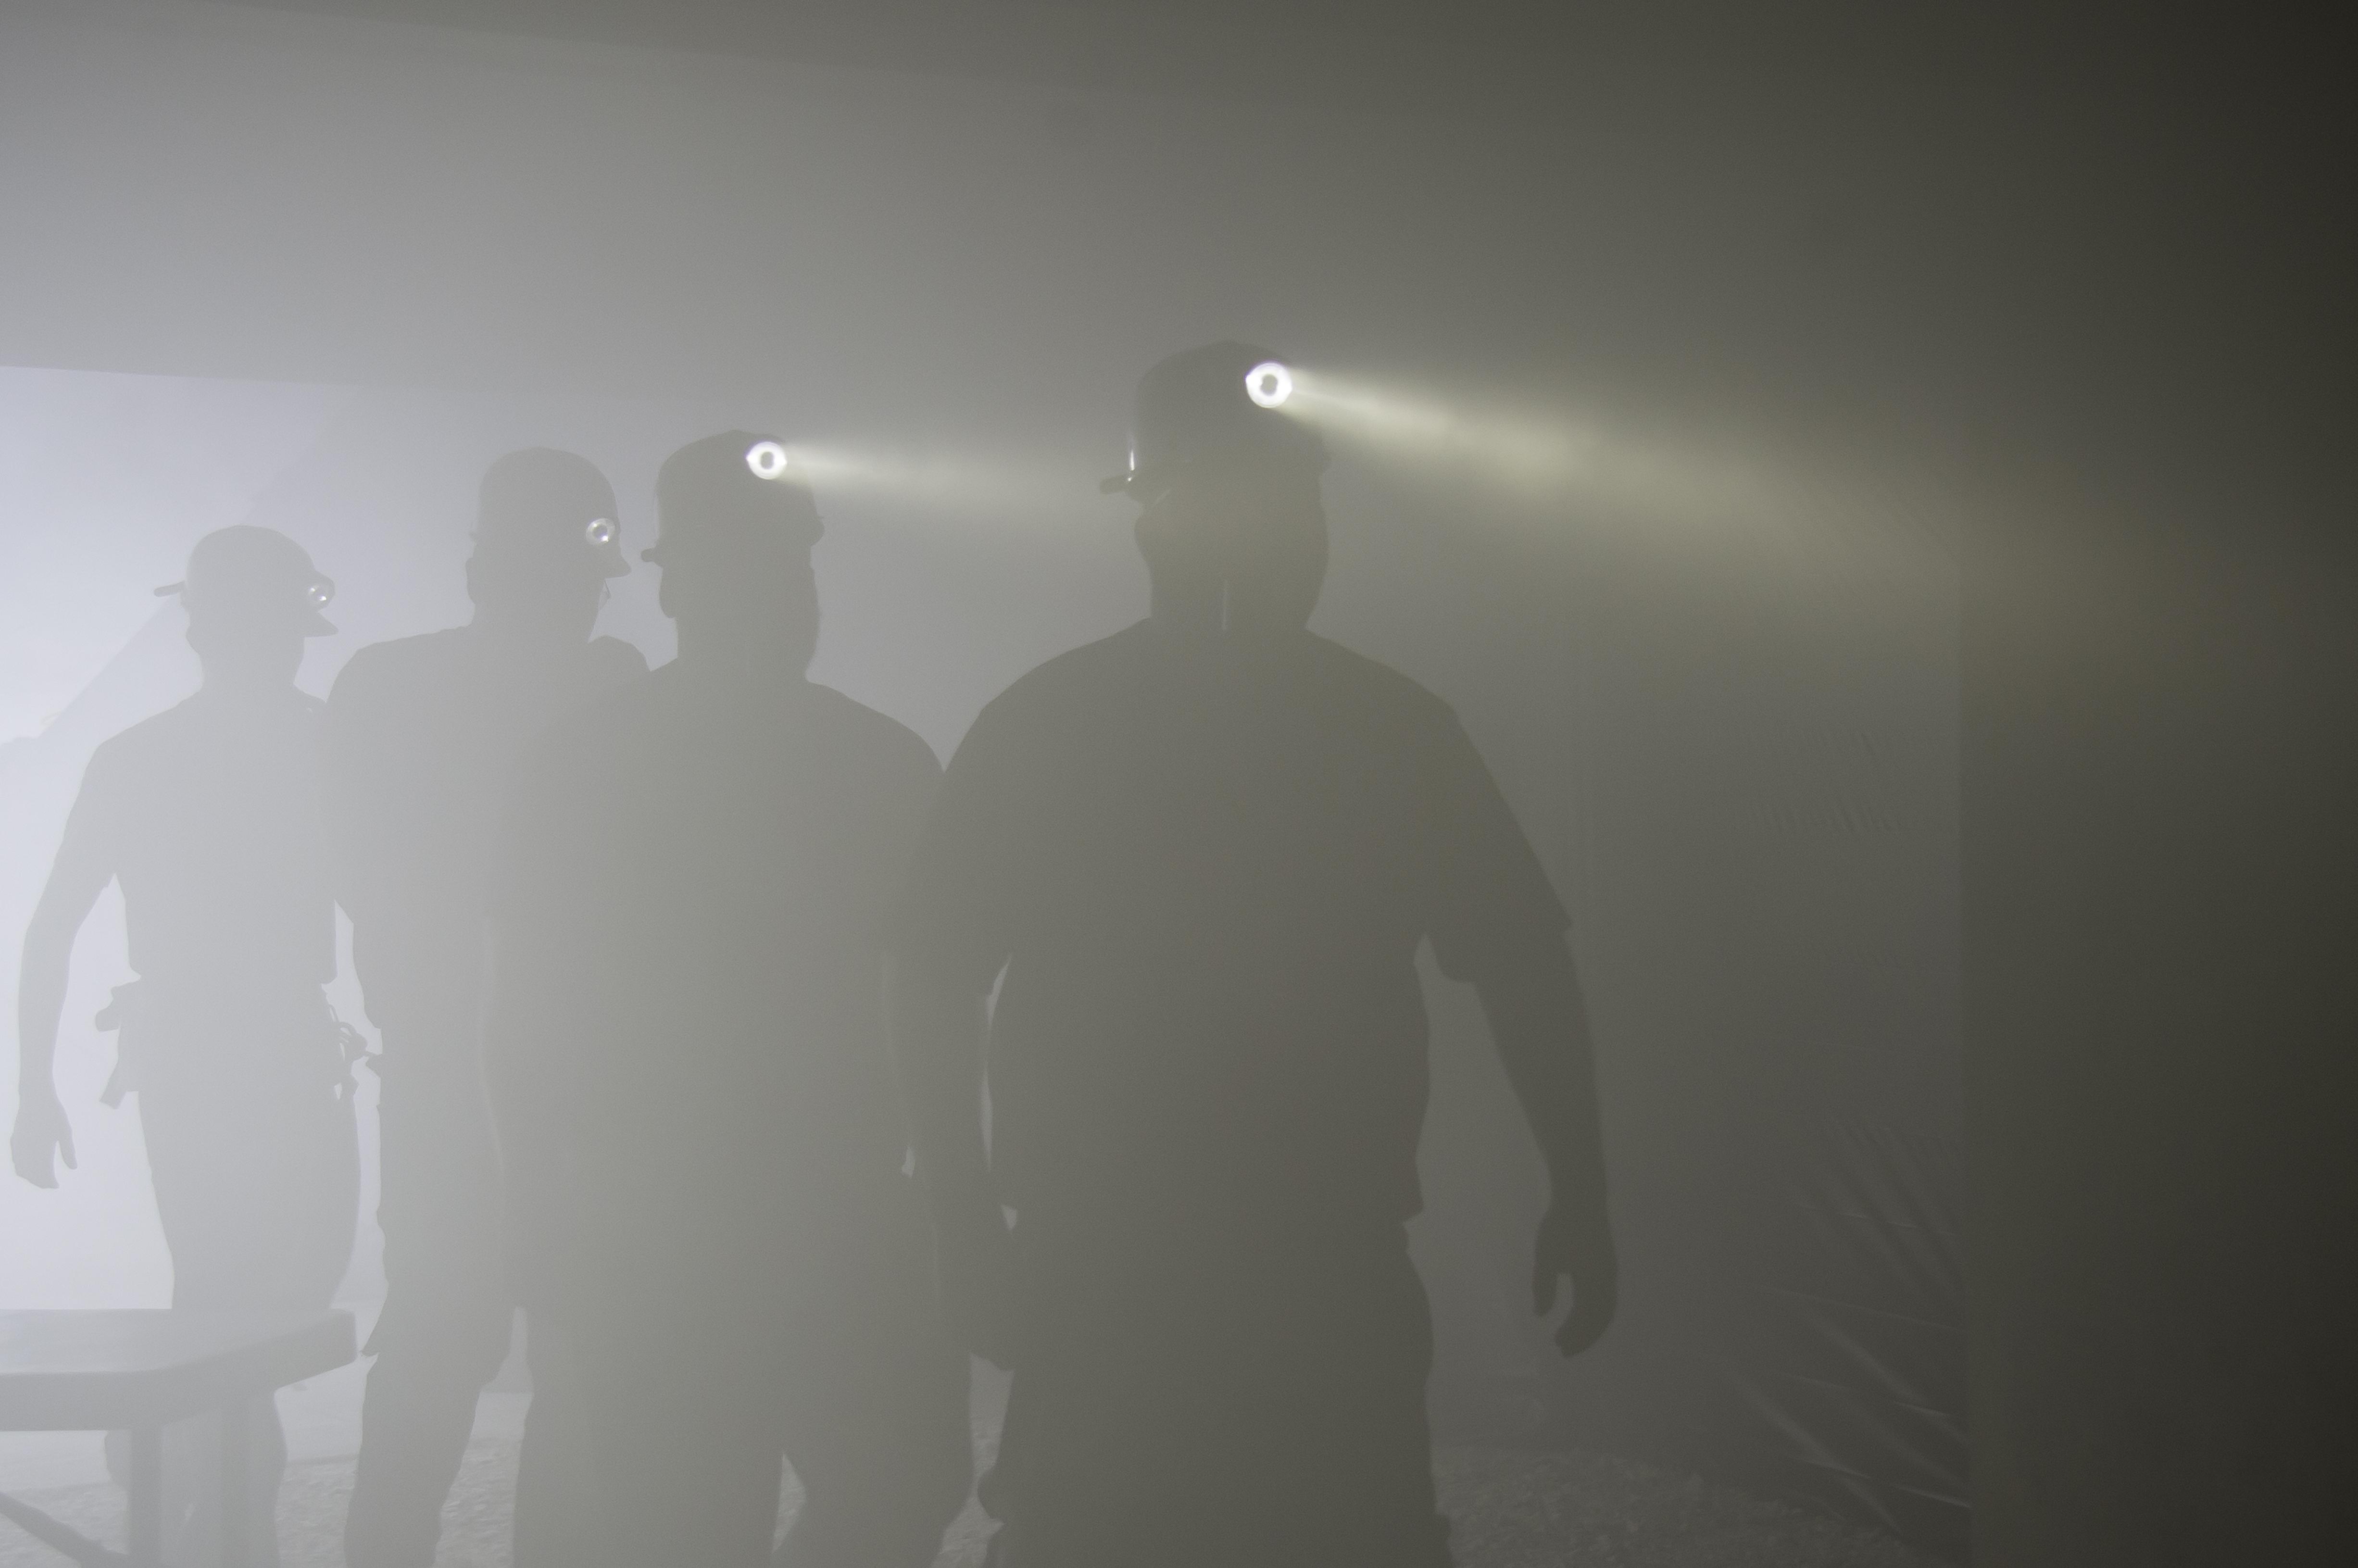 A group of miners in a dark area with their lights on